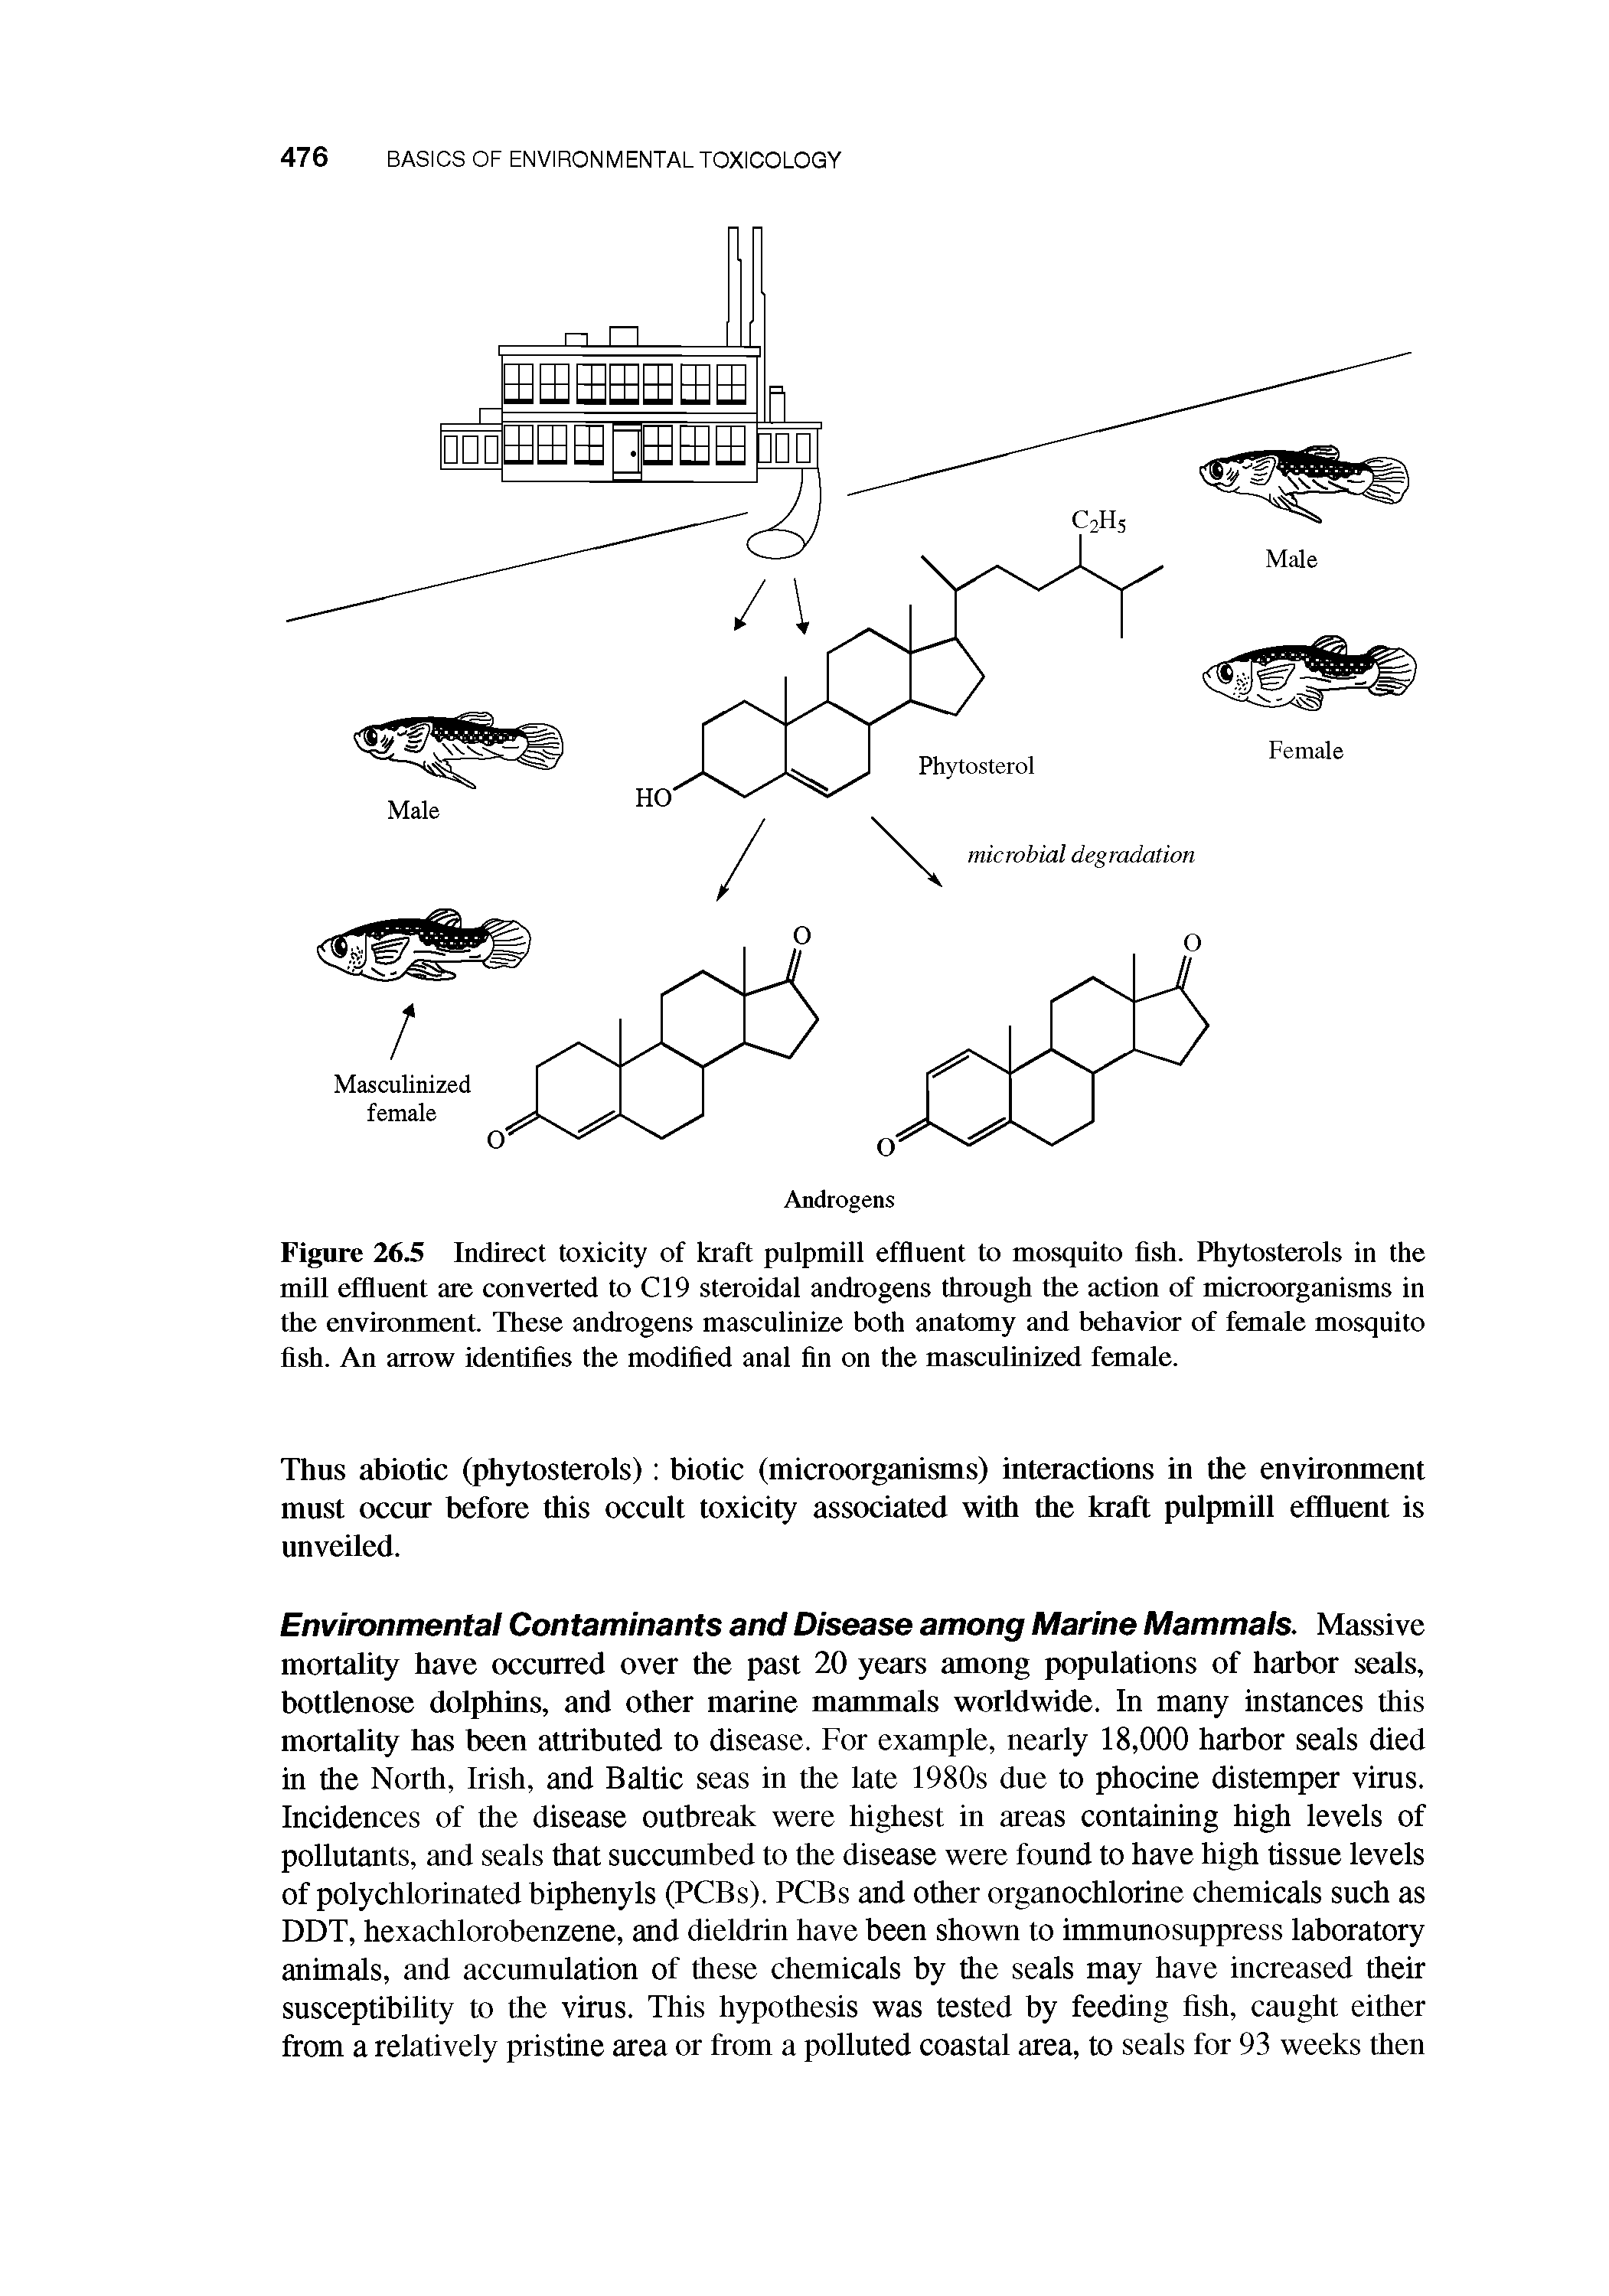 Figure 26.5 Indirect toxicity of kraft pulpmill effluent to mosquito fish. Phytosterols in the mill effluent are converted to C19 steroidal androgens through the action of microorganisms in the environment. These androgens masculinize both anatomy and behavior of female mosquito fish. An arrow identifies the modified anal fln on the masculinized female.